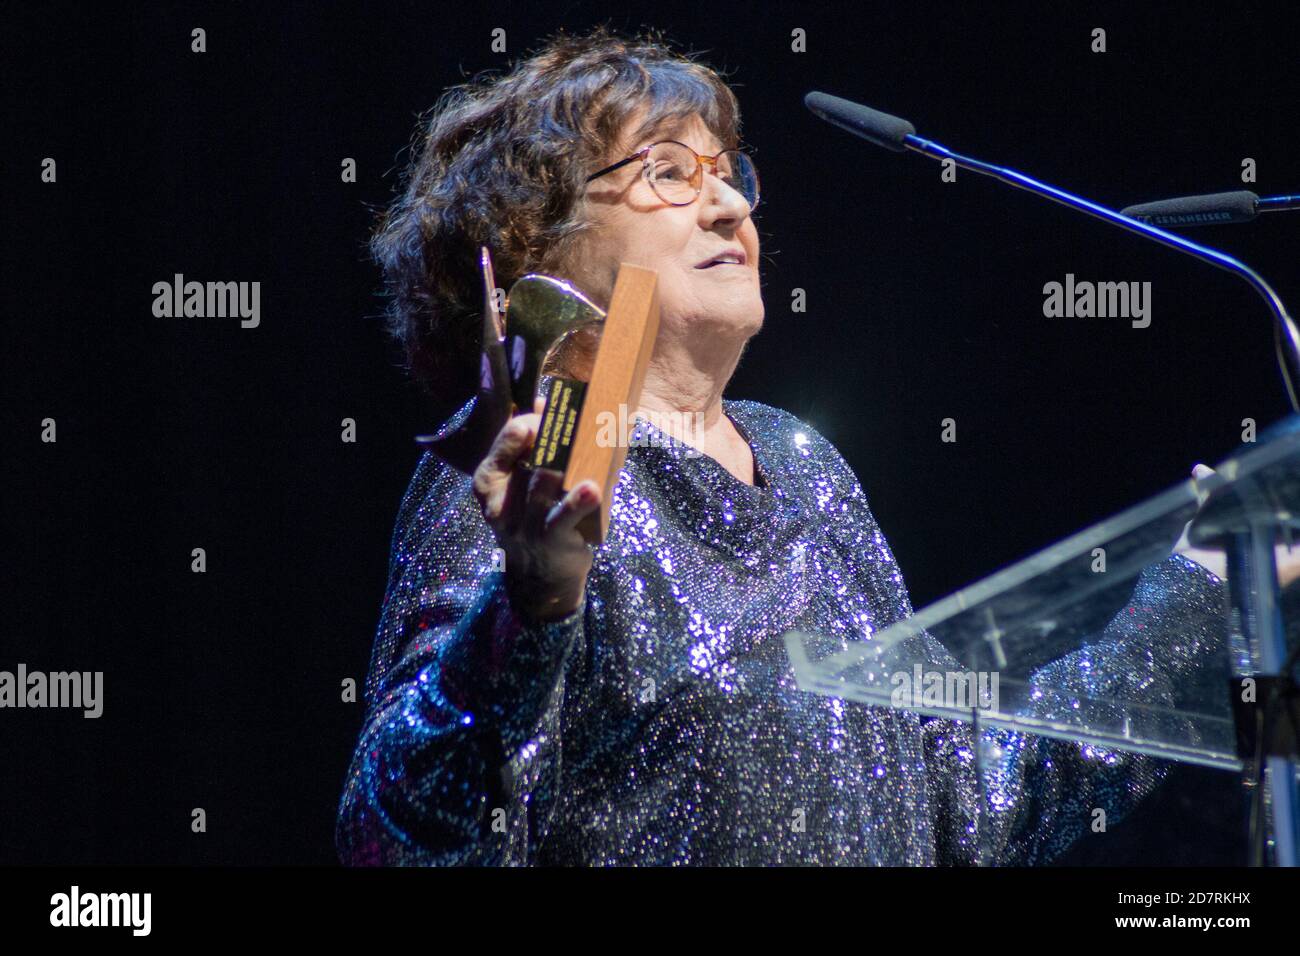 Julieta Serrano receives her award from 'Union de Actores' Awards 2020 at Teatro Circo Price in Madrid, Spain.March 09, 2020. (Oscar Gil / Alfa Images Stock Photo